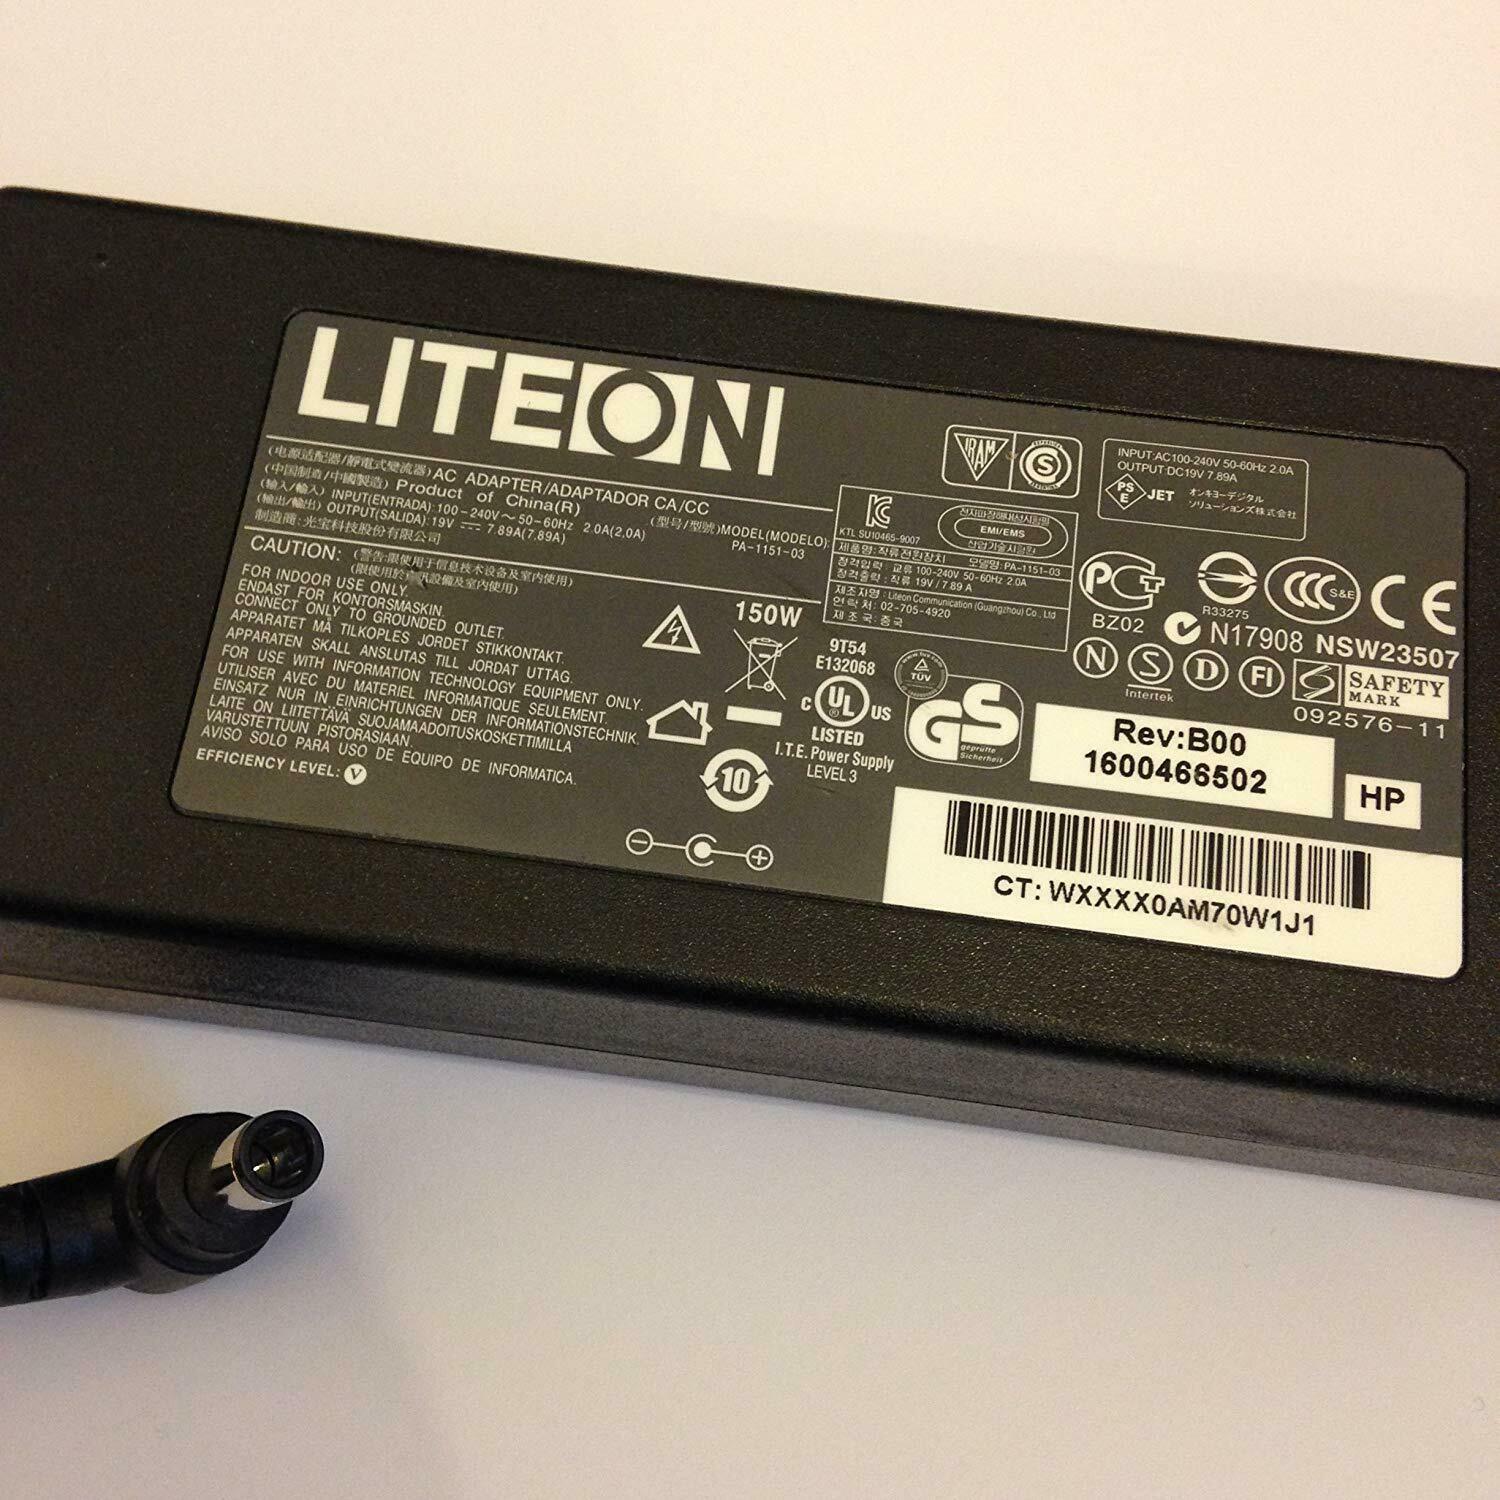 150W LITEON Power Adapter 19V 7.89A, PA-1151-03, PA-1181-02,for ACER Z35 MONITOR 150W LITEON Power Adapter 19V 7.89A,